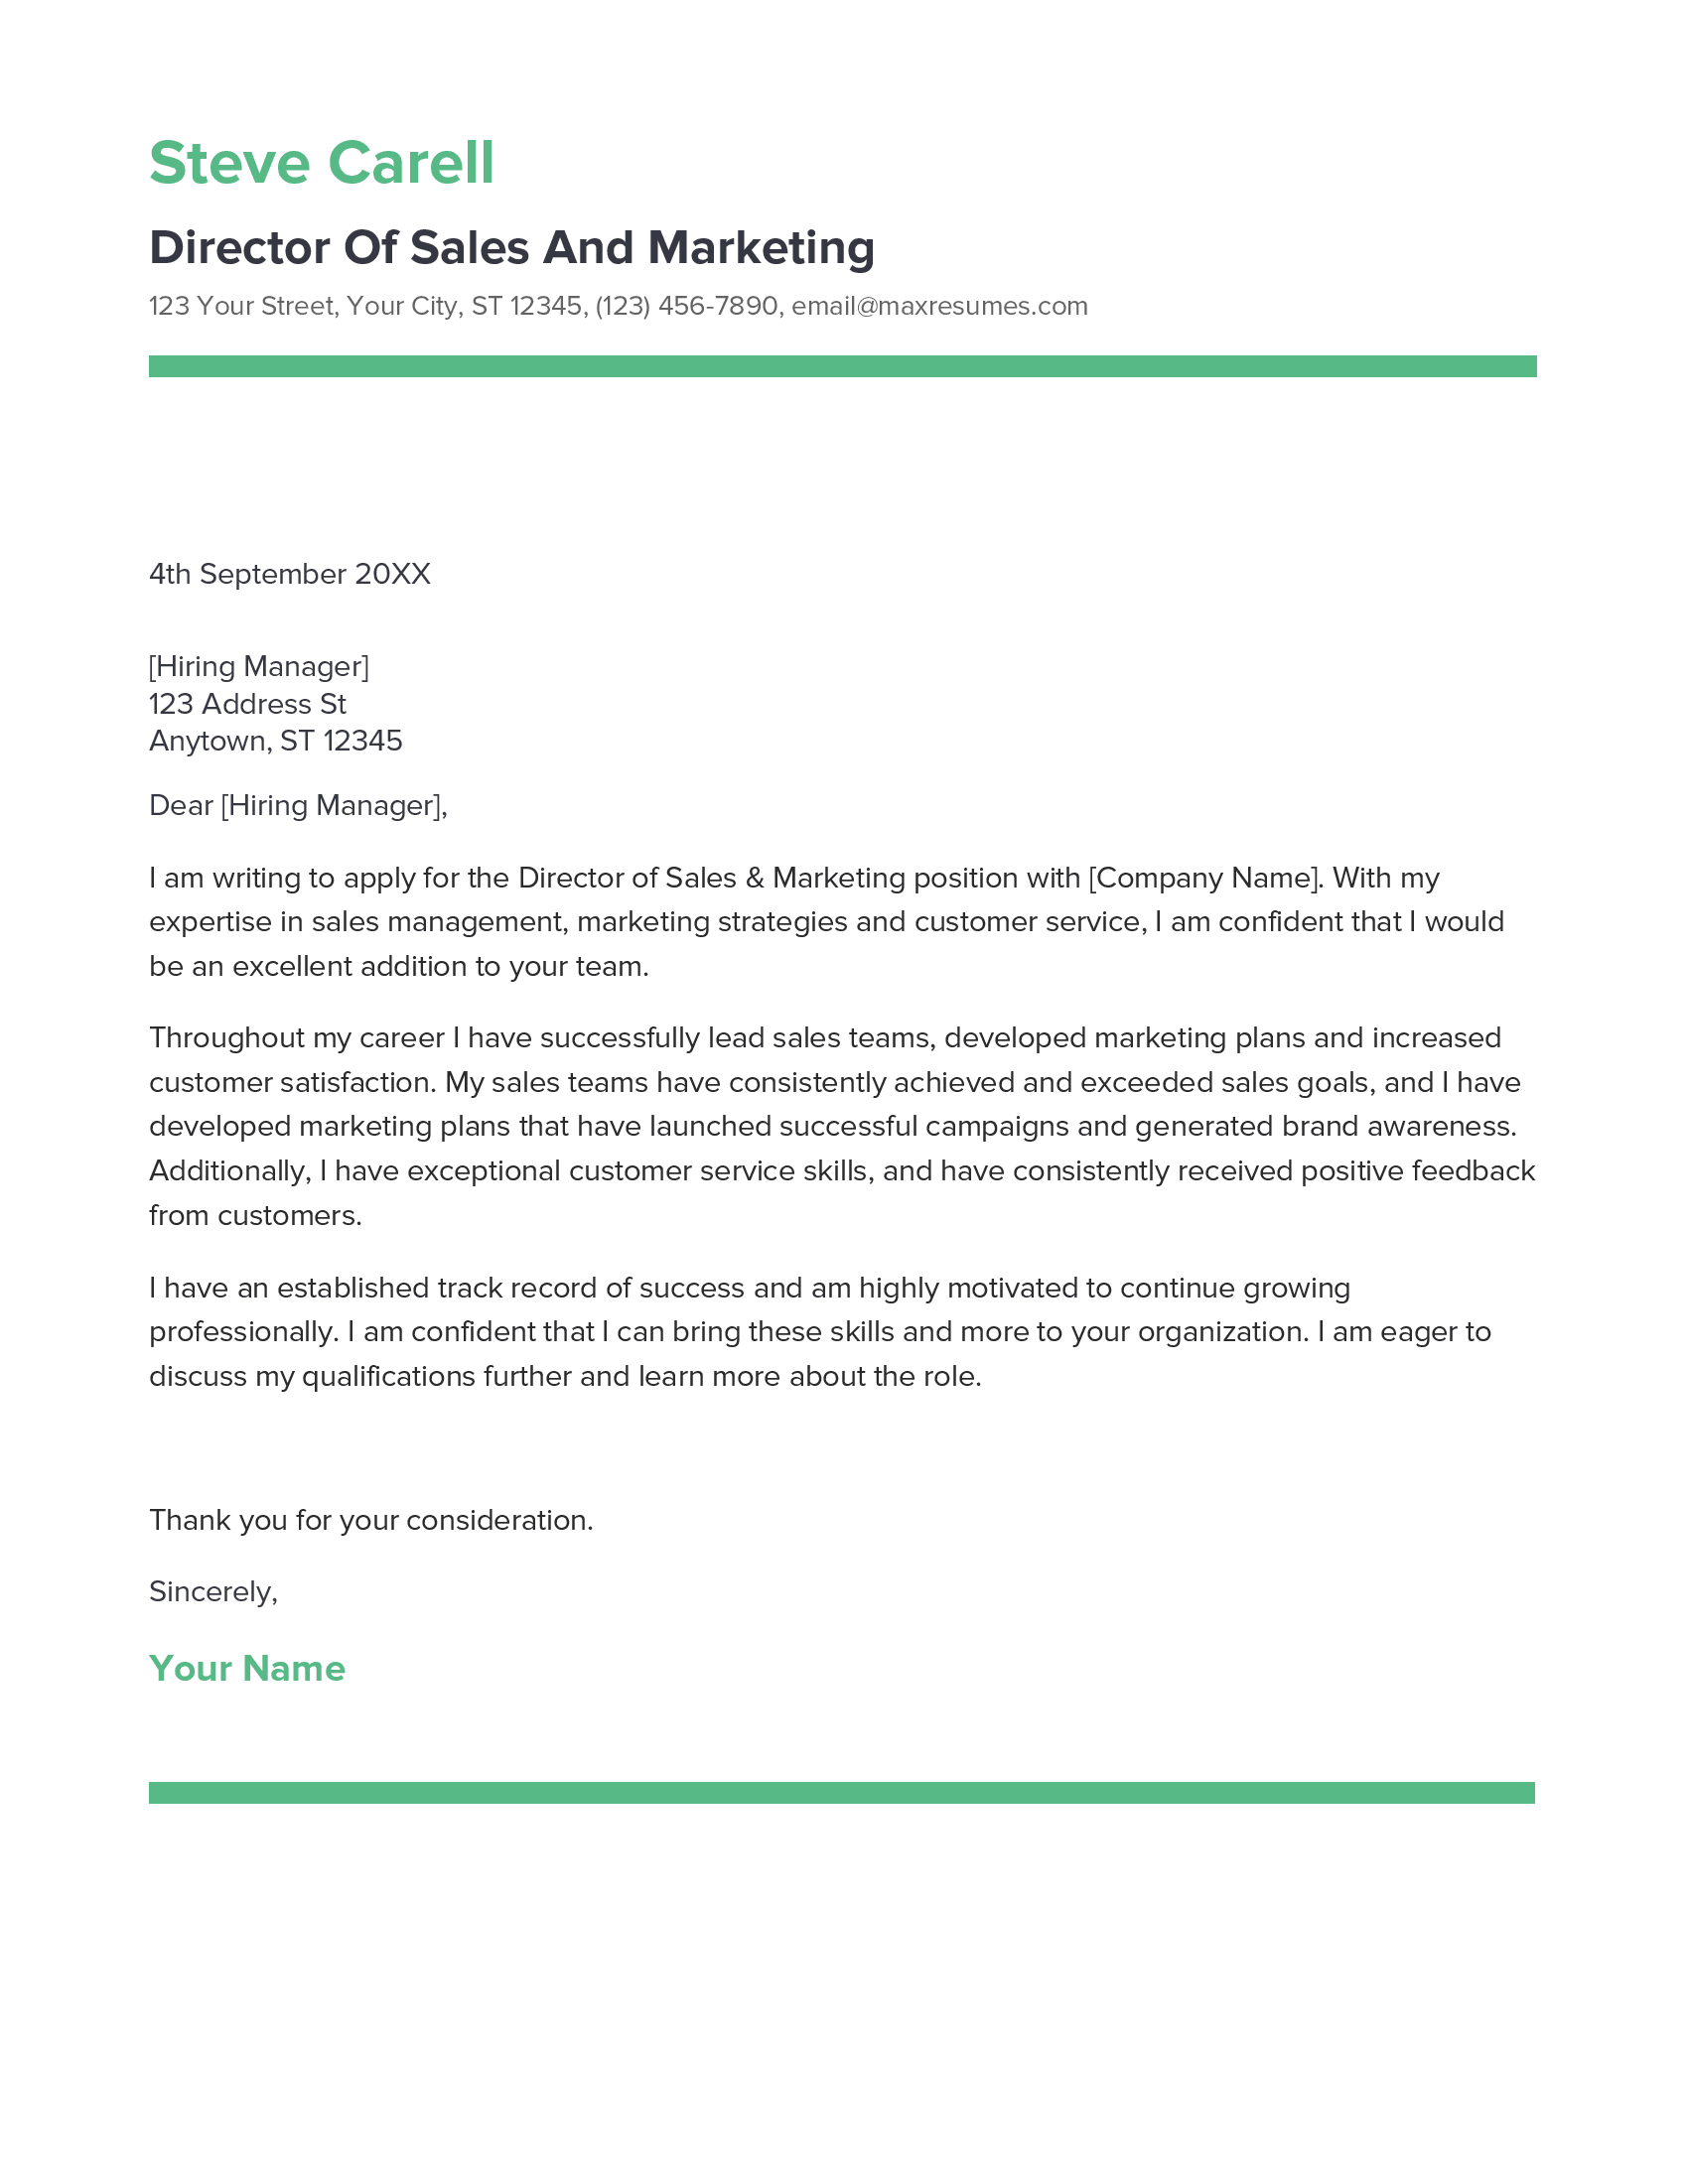 Director Of Sales And Marketing Cover Letter Example